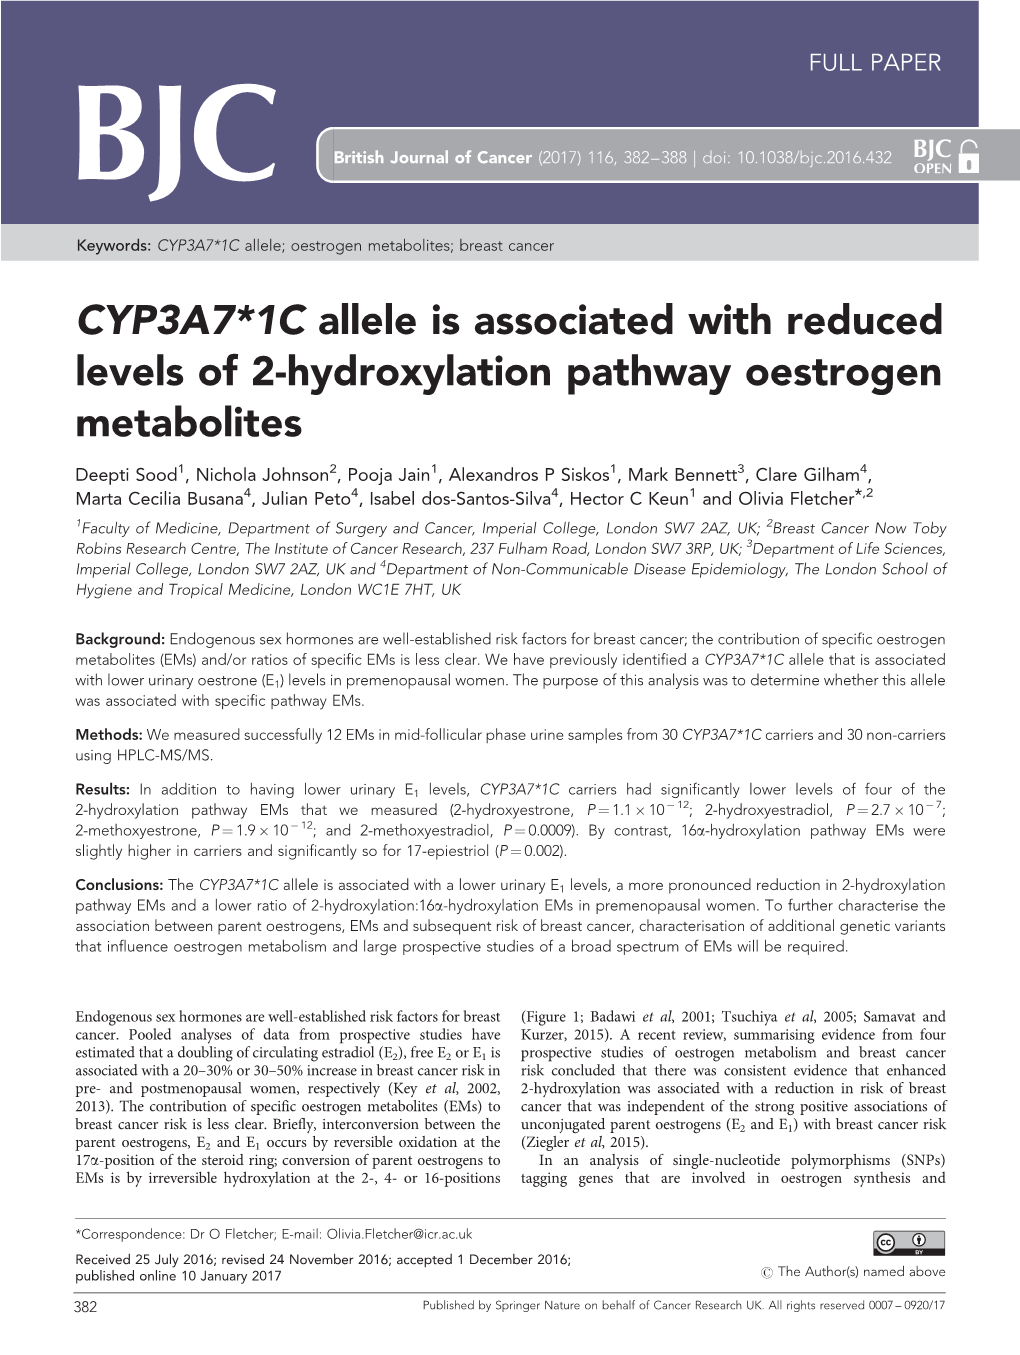 1C Allele Is Associated with Reduced Levels of 2-Hydroxylation Pathway Oestrogen Metabolites